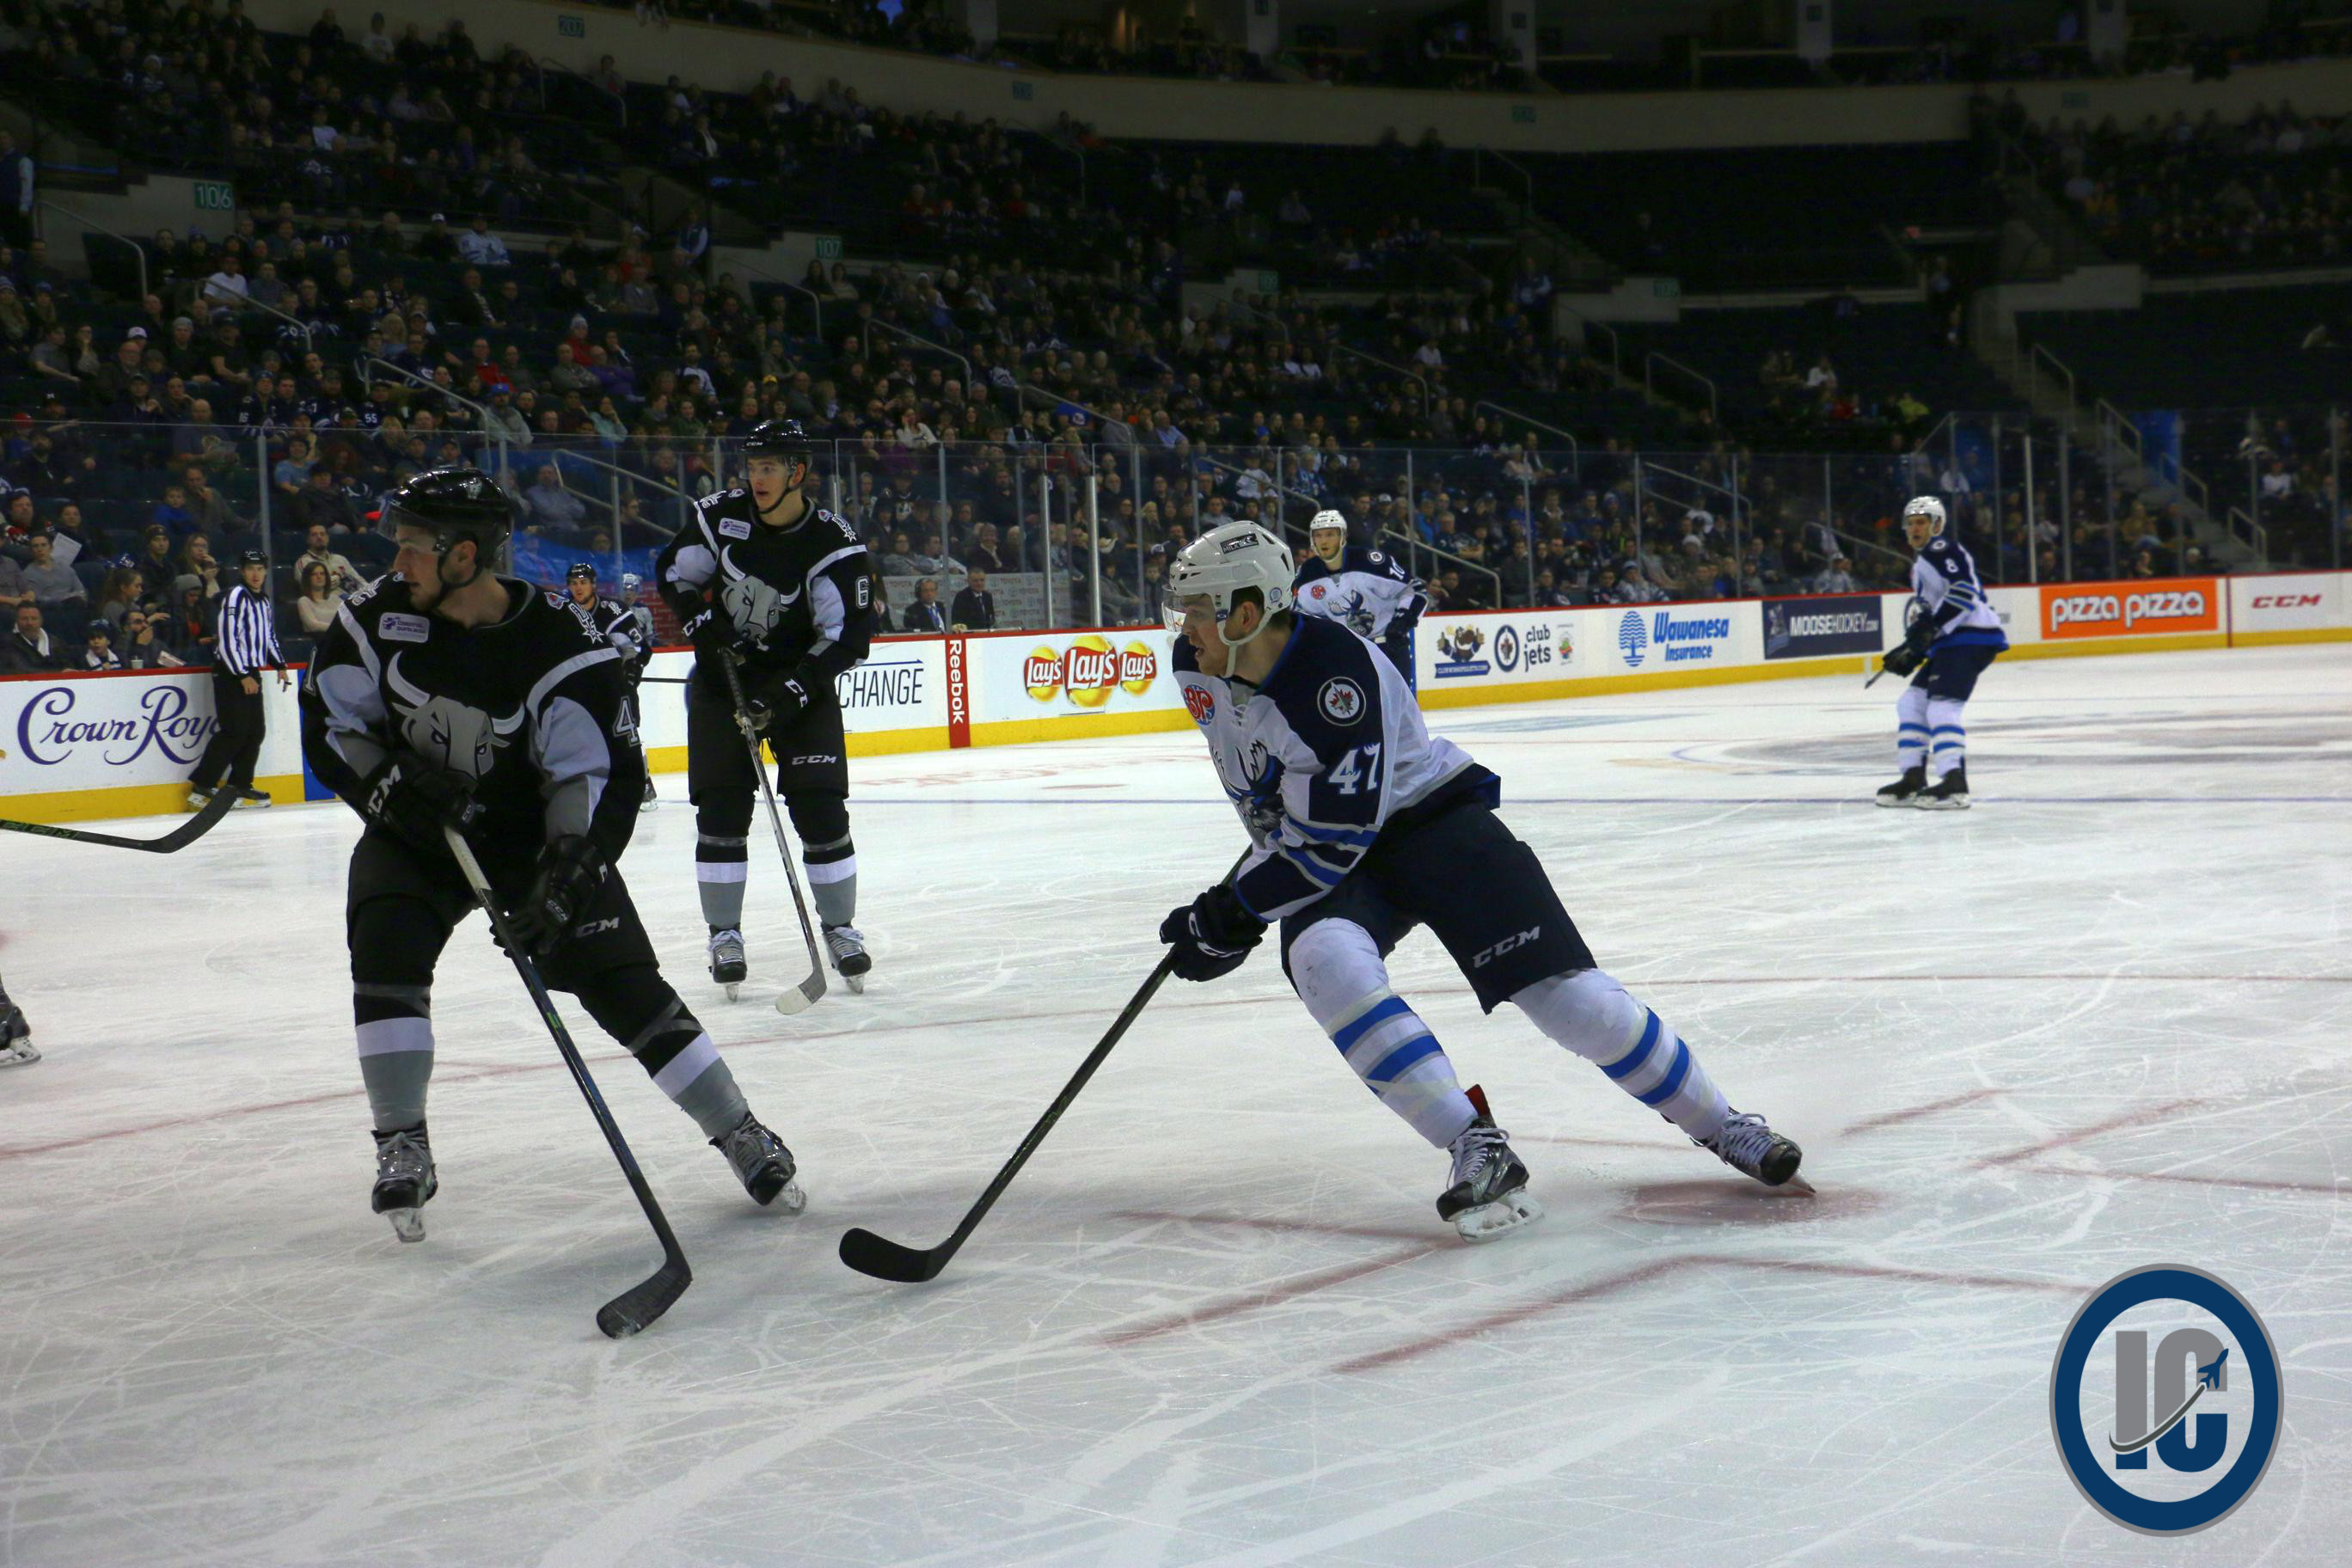 Lowry playing for the Moose